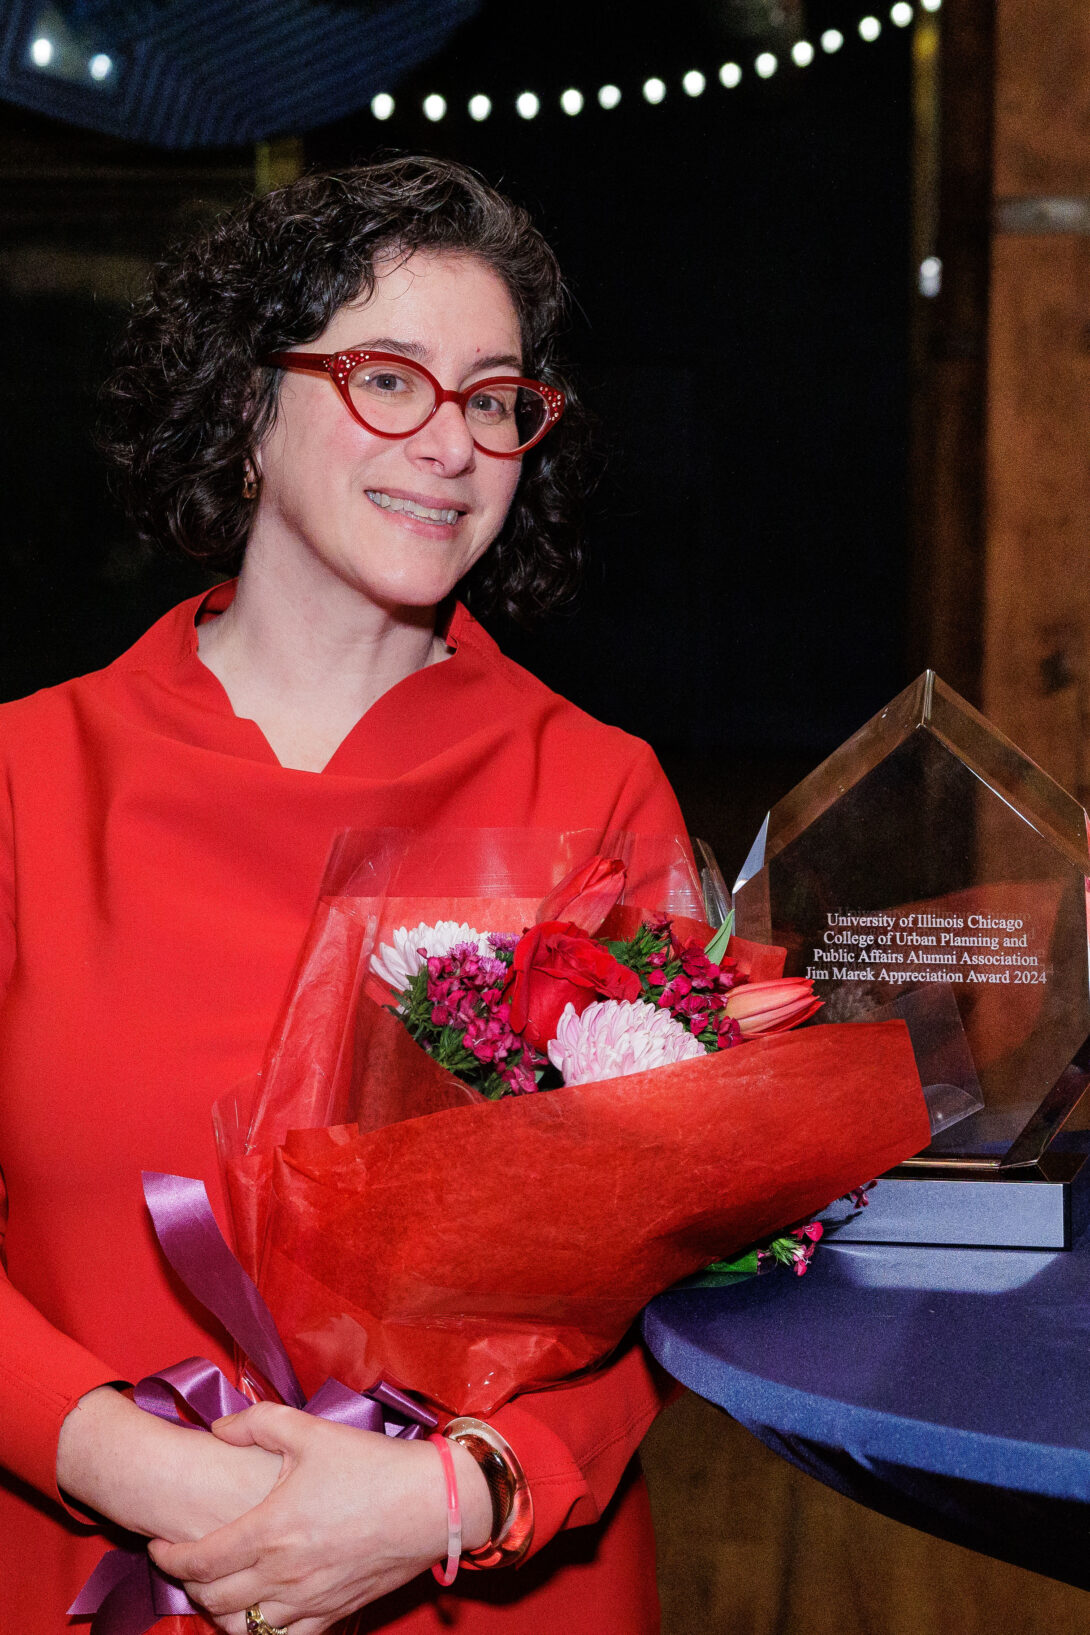 Rachel Weber with a bouquet of flowers and her Jim Marek Award, a glass design in the shape of a flame.